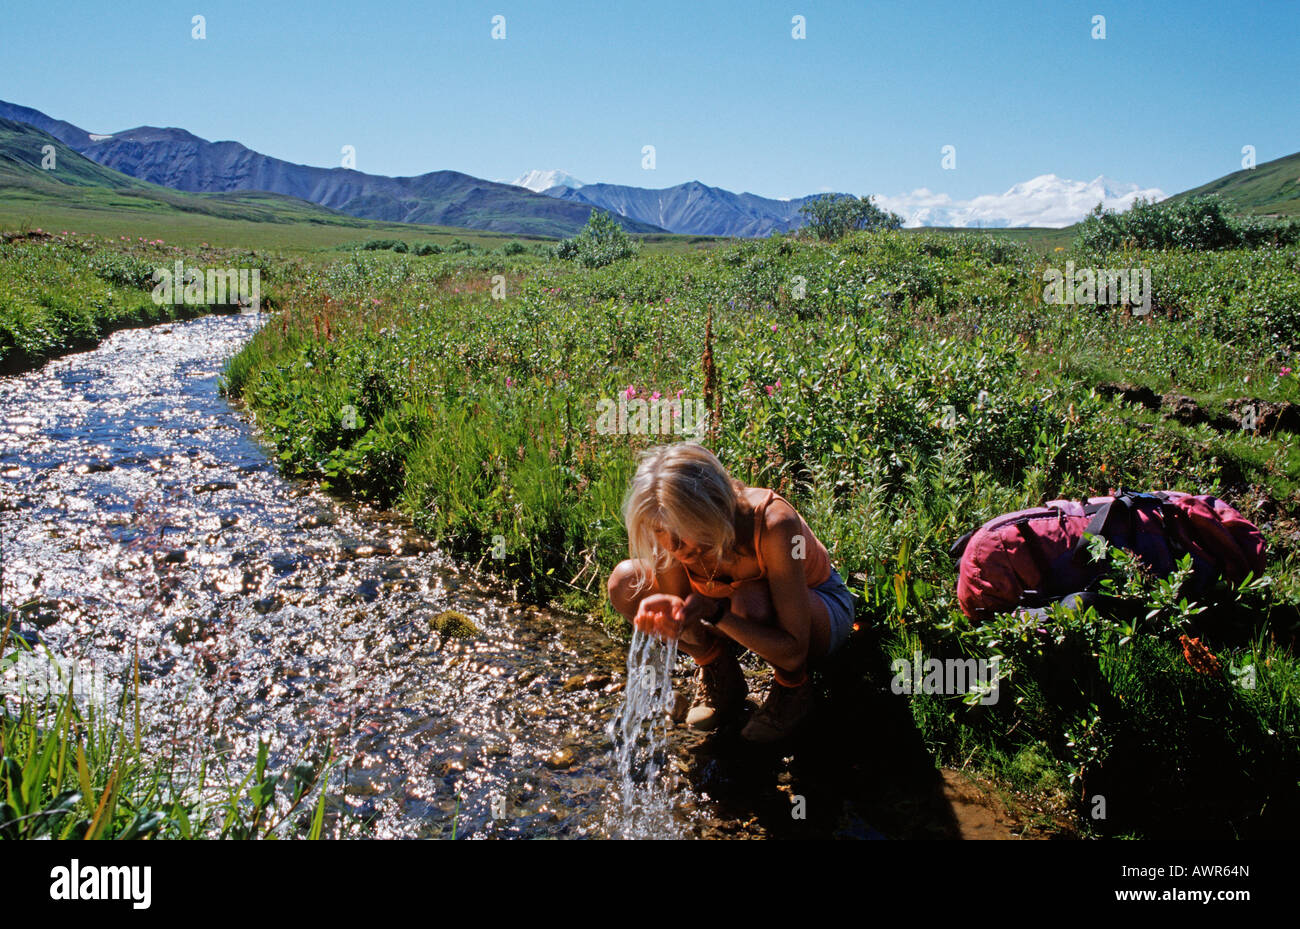 Cooling off in a cold mountain stream, Mt. McKinley in background, Denali National Park, Alaska, USA Stock Photo